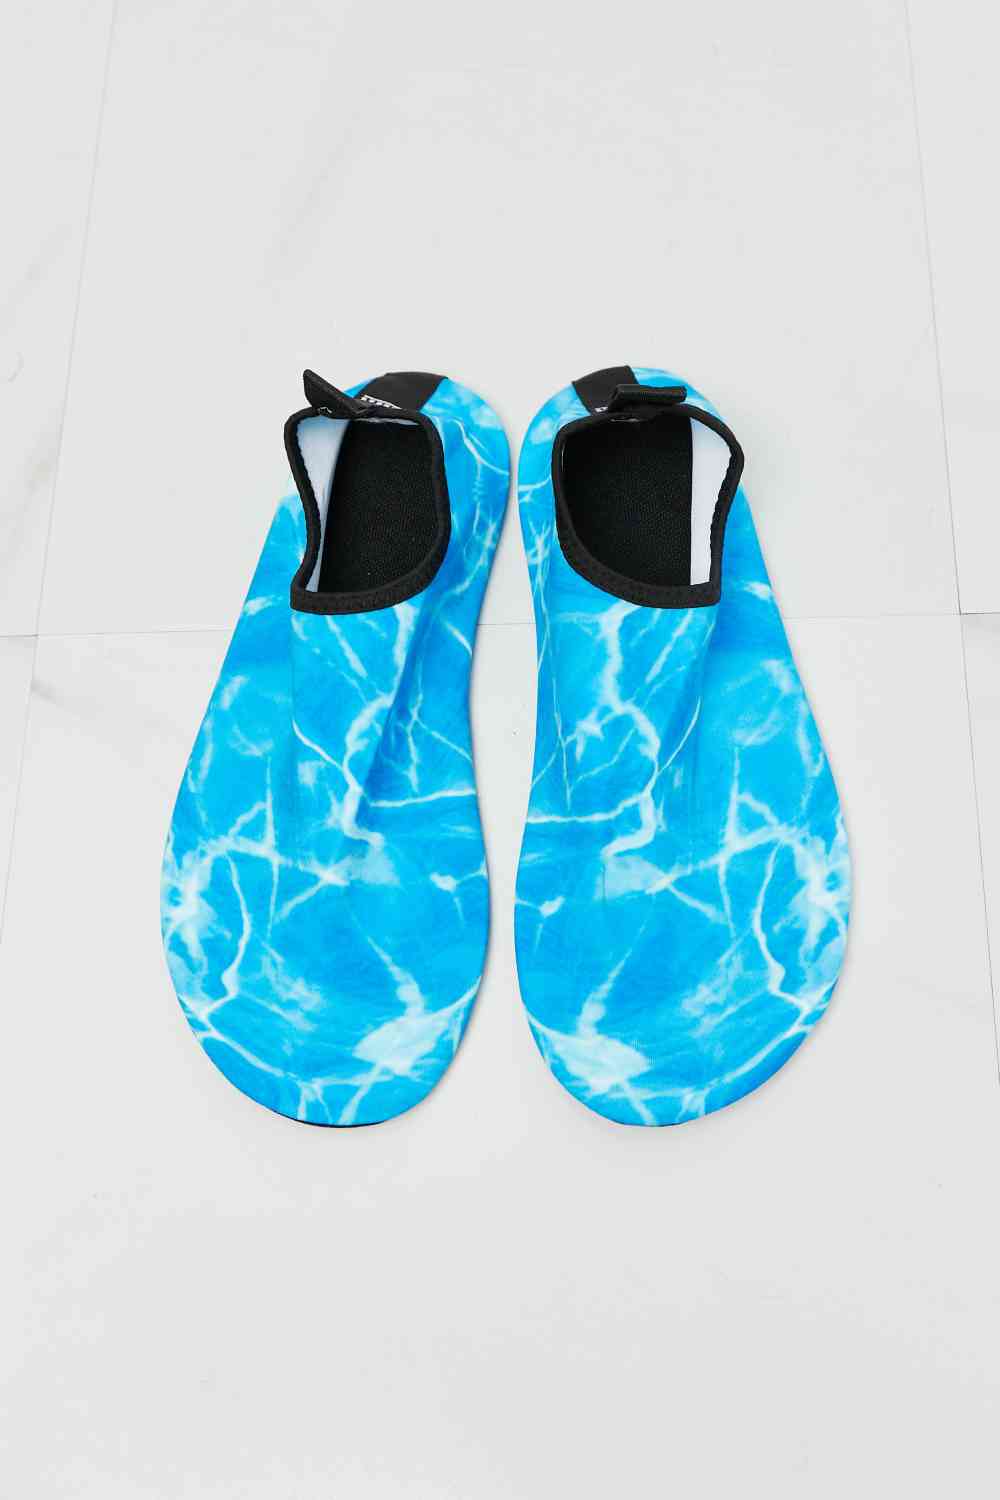 MMshoes On The Shore Water Shoes in Sky Blue Footwear JT's Designer Fashion